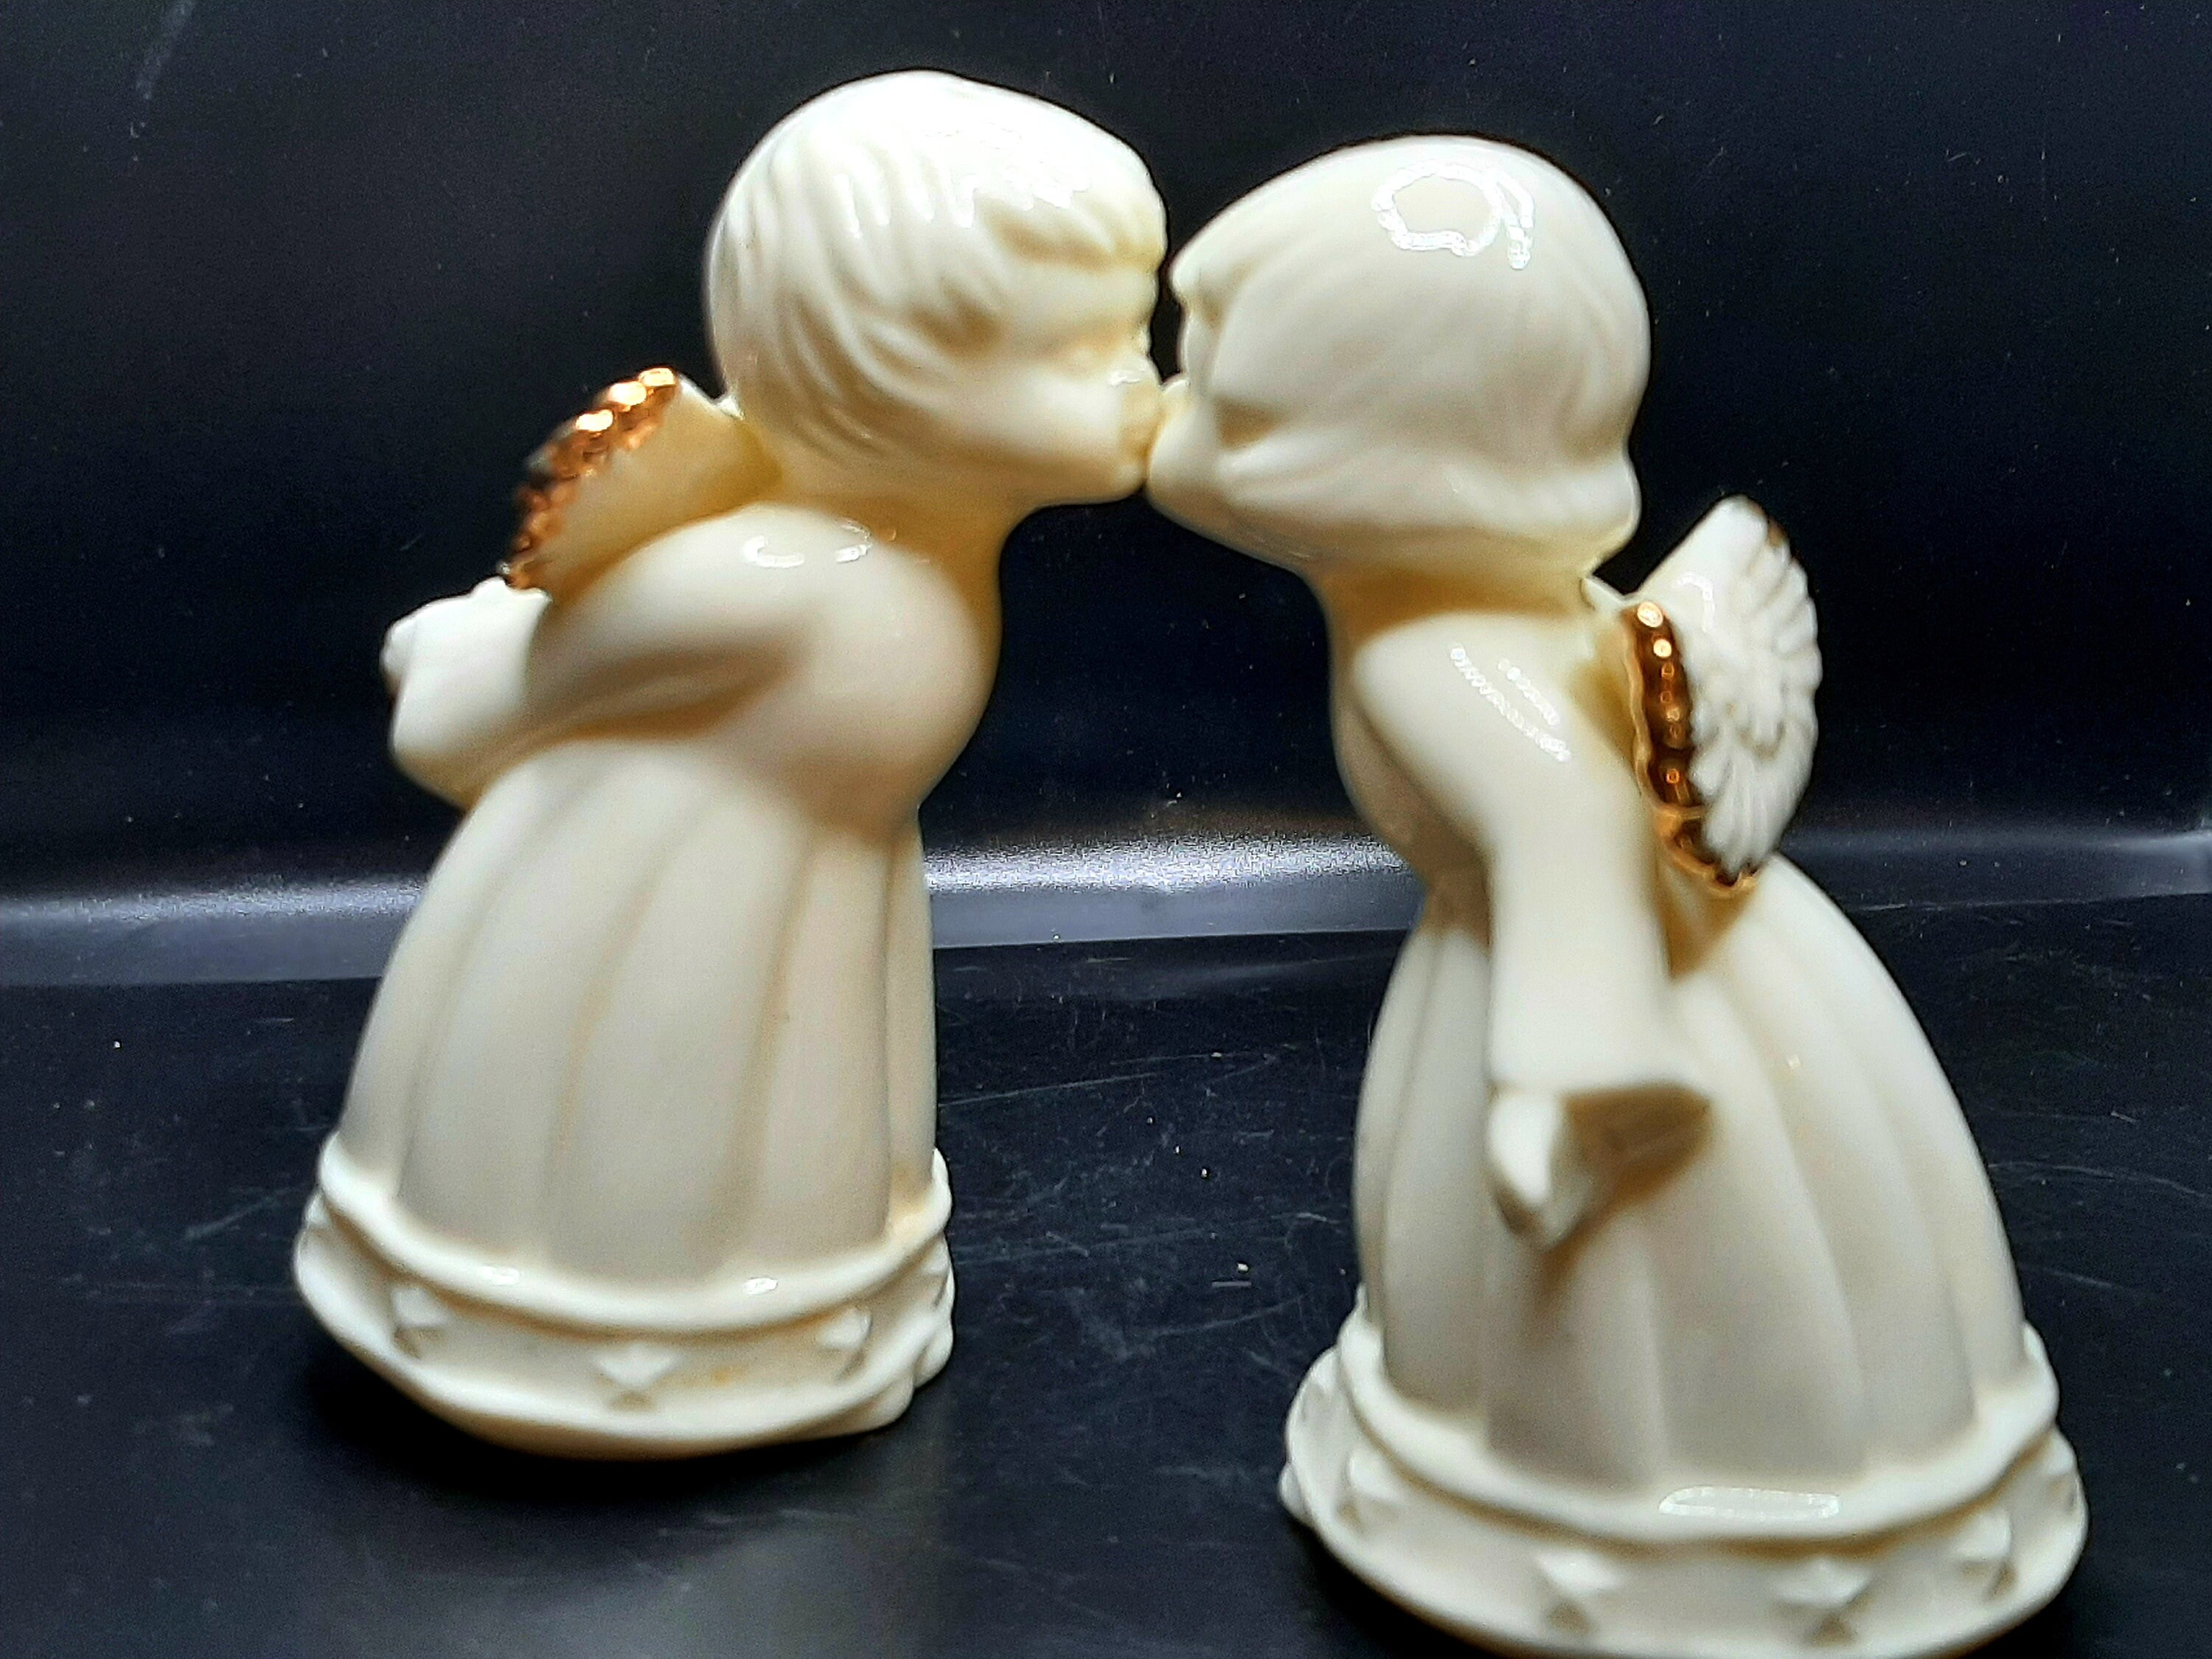 Attractives Magnetic Salt and Pepper Shakers Hot Chili Peppers They Kiss!